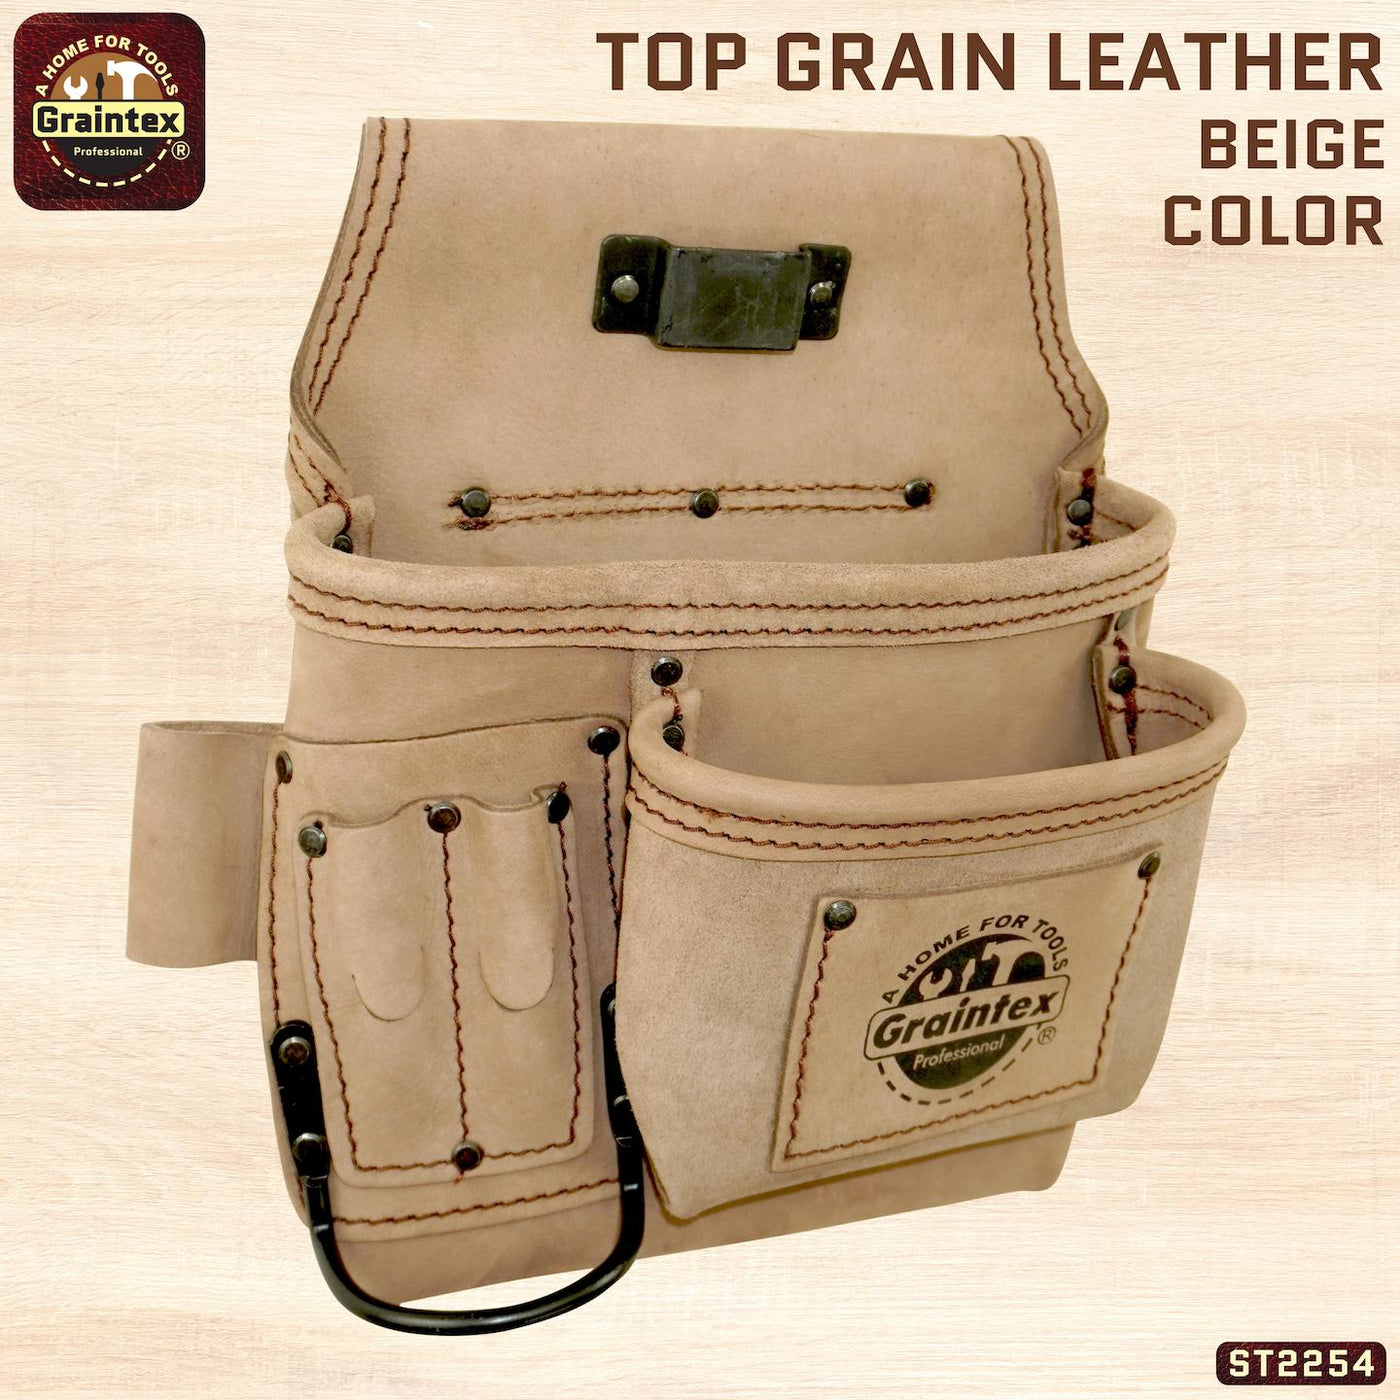 ST2254 :: 5 Pocket Right Handed Nail & Tool Pouch Beige Color Top Grain Leather